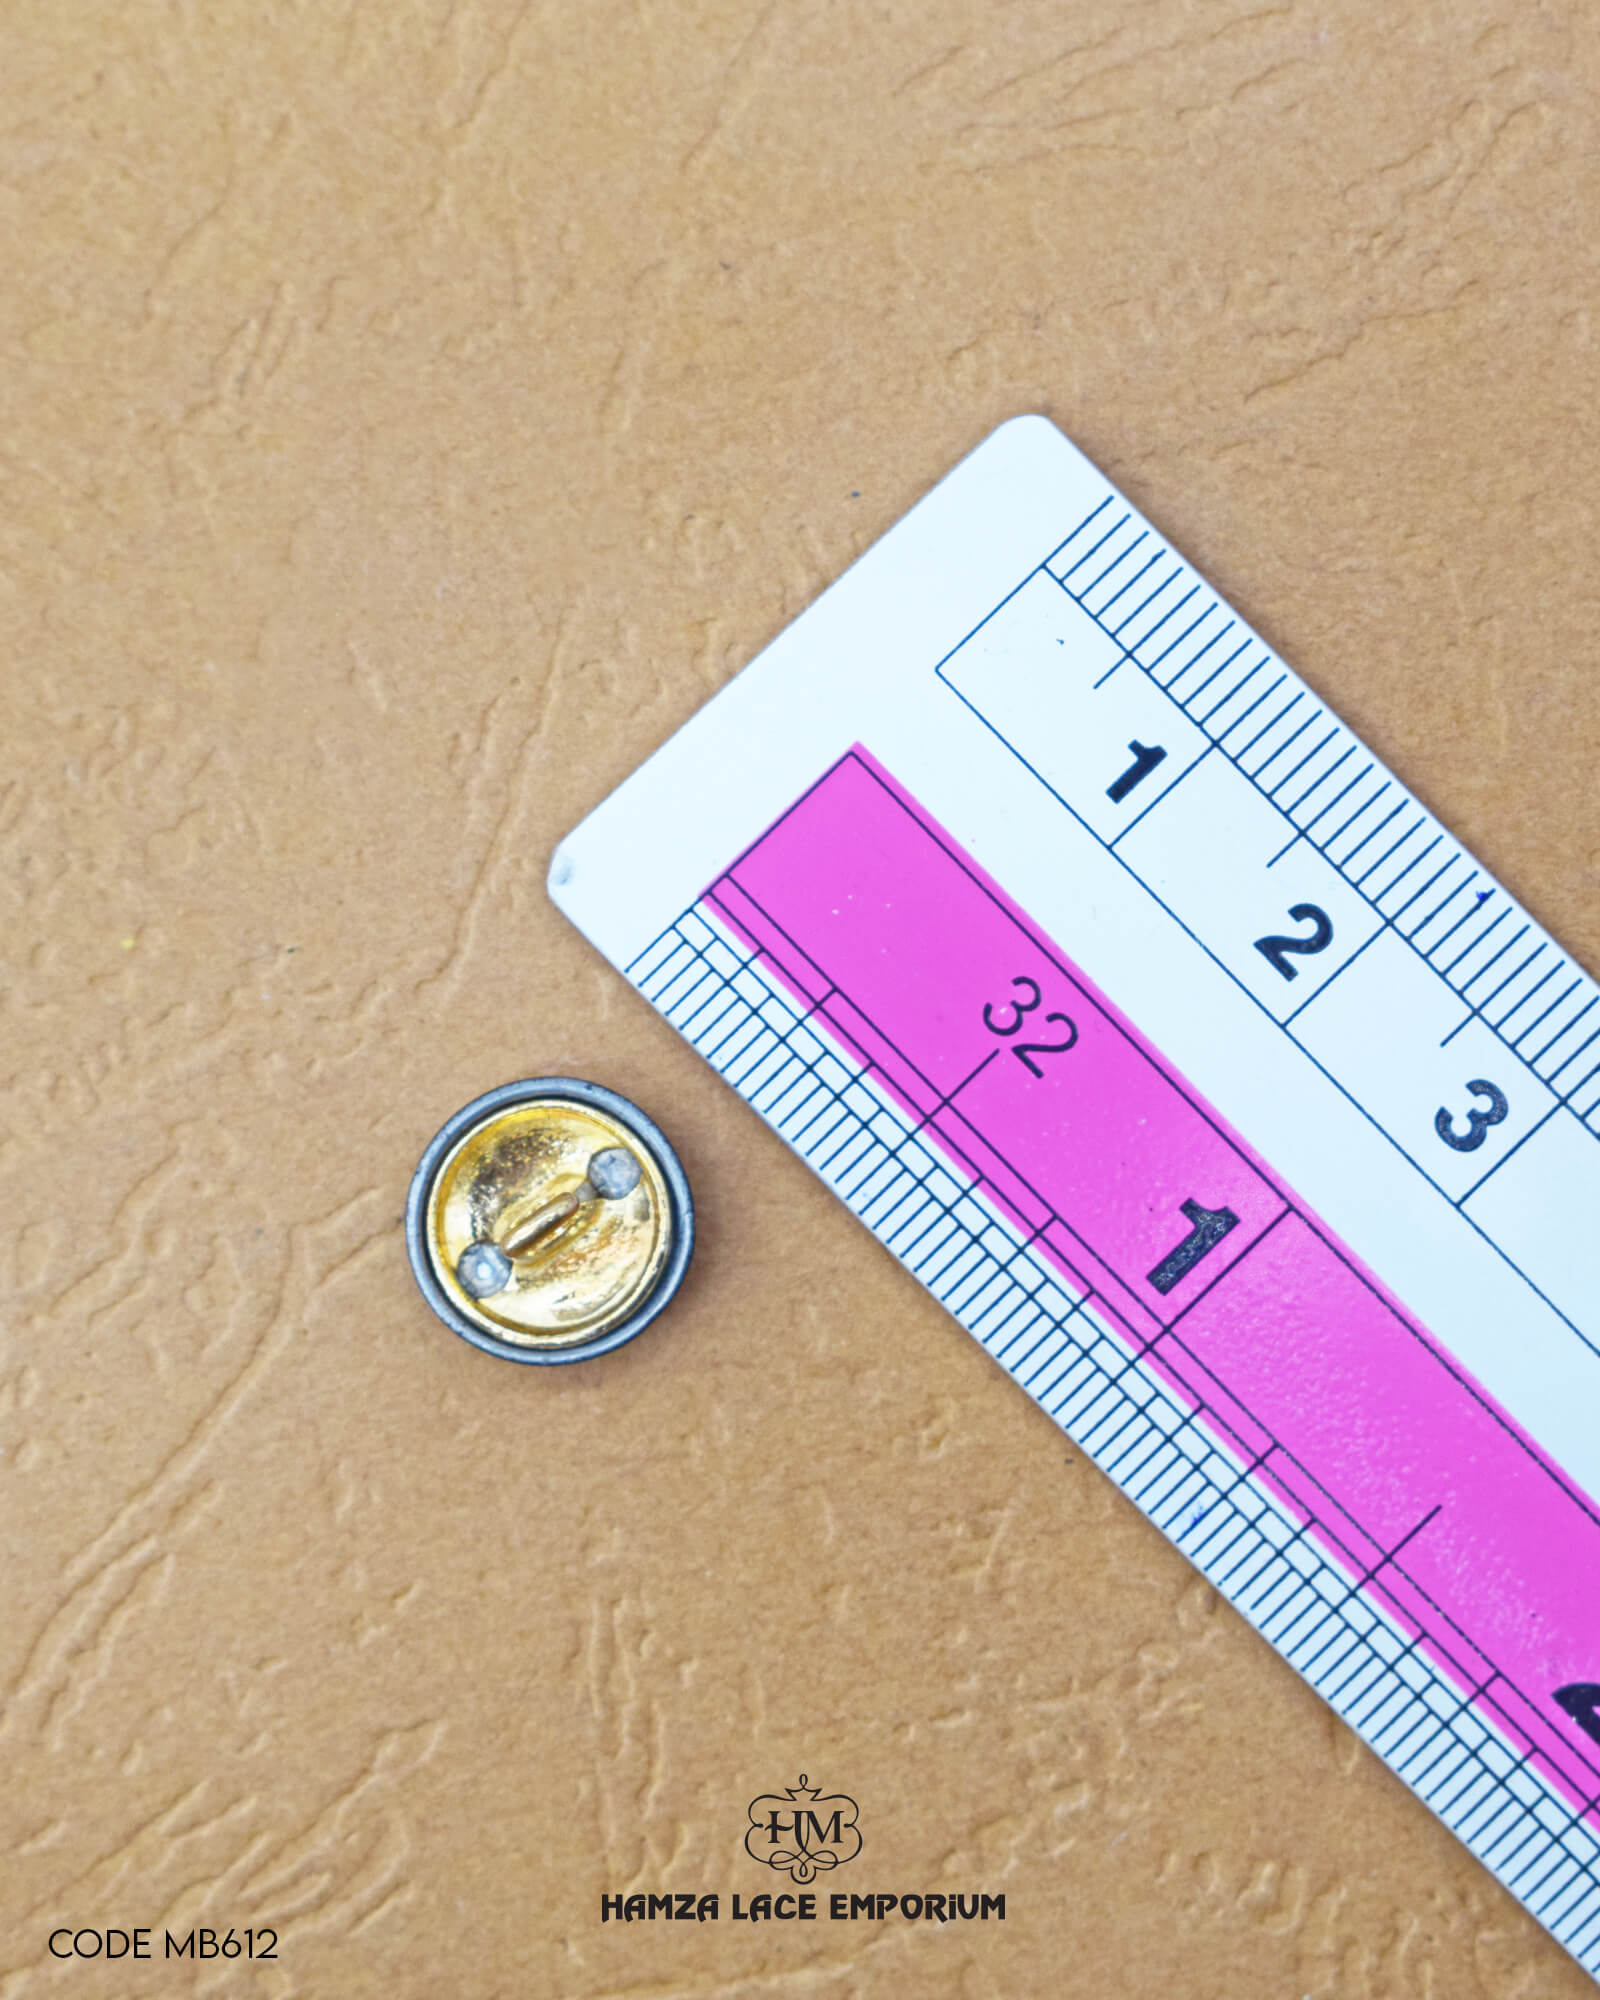 The size of the 'Metal Suiting Button MB612' is measured using a ruler.